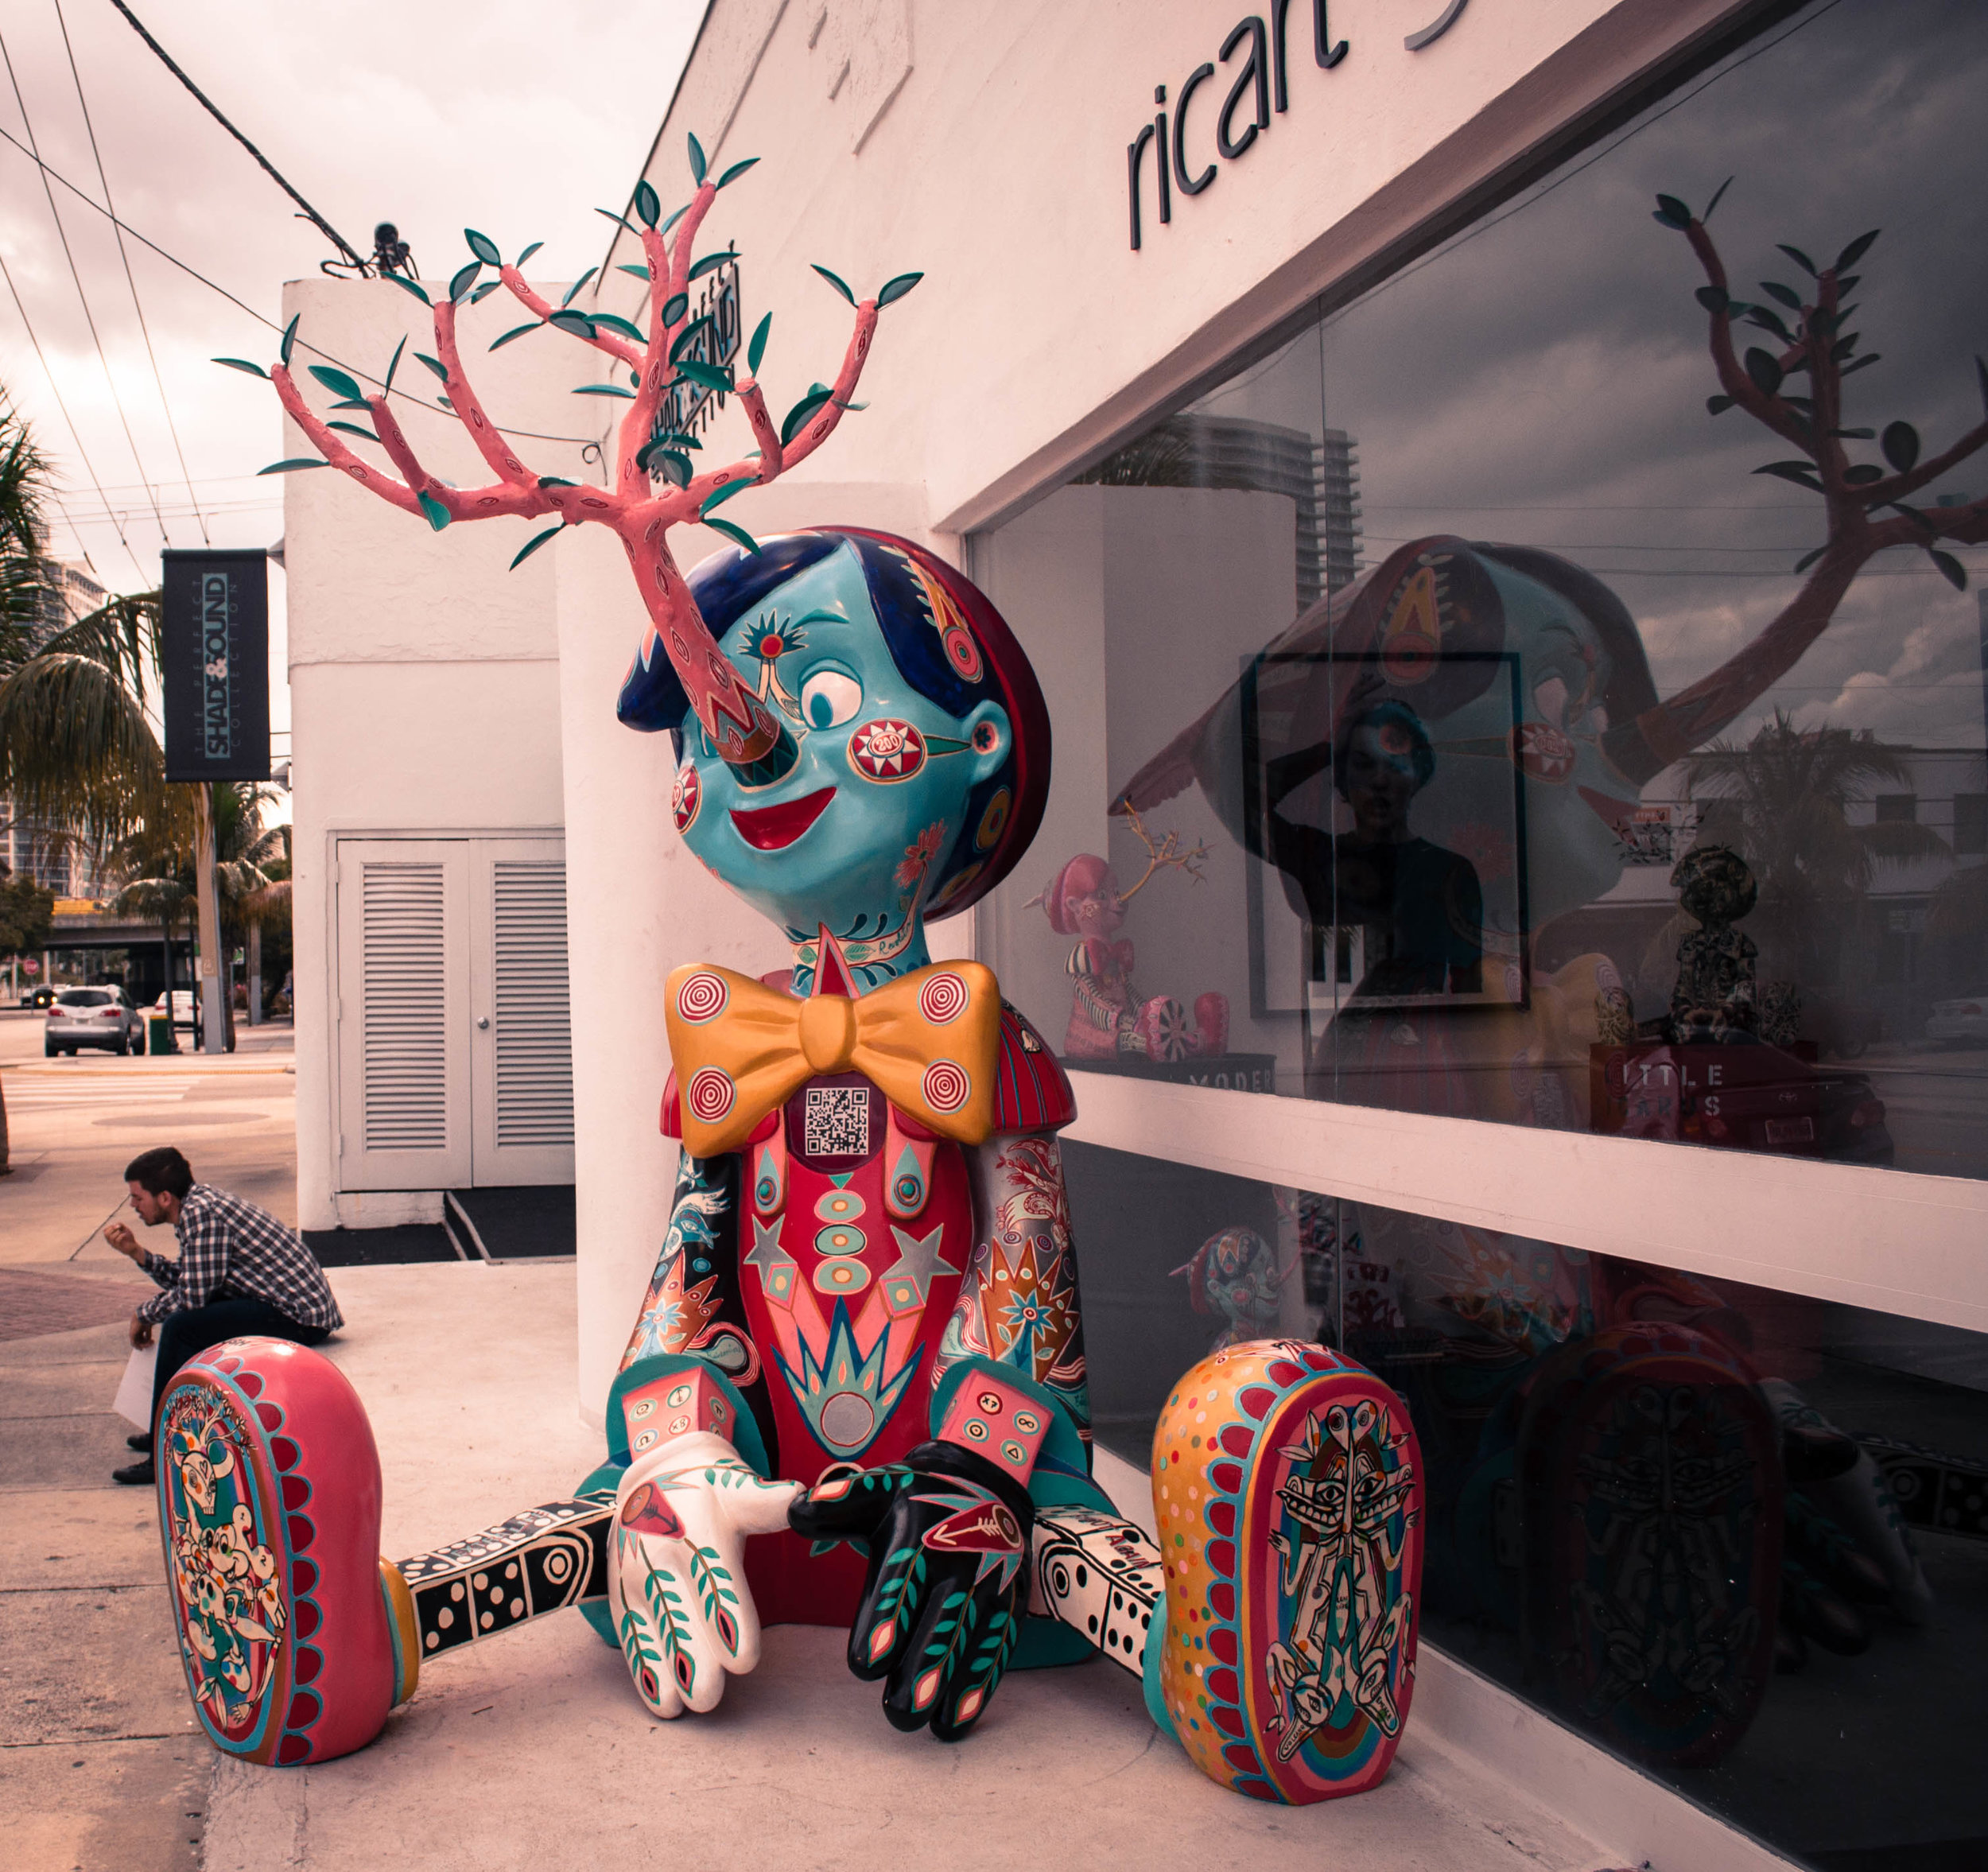 Giant sculpture of Pinocchio with a lot of colour in Wynwood, the graffiti and art neighborhood of Miami